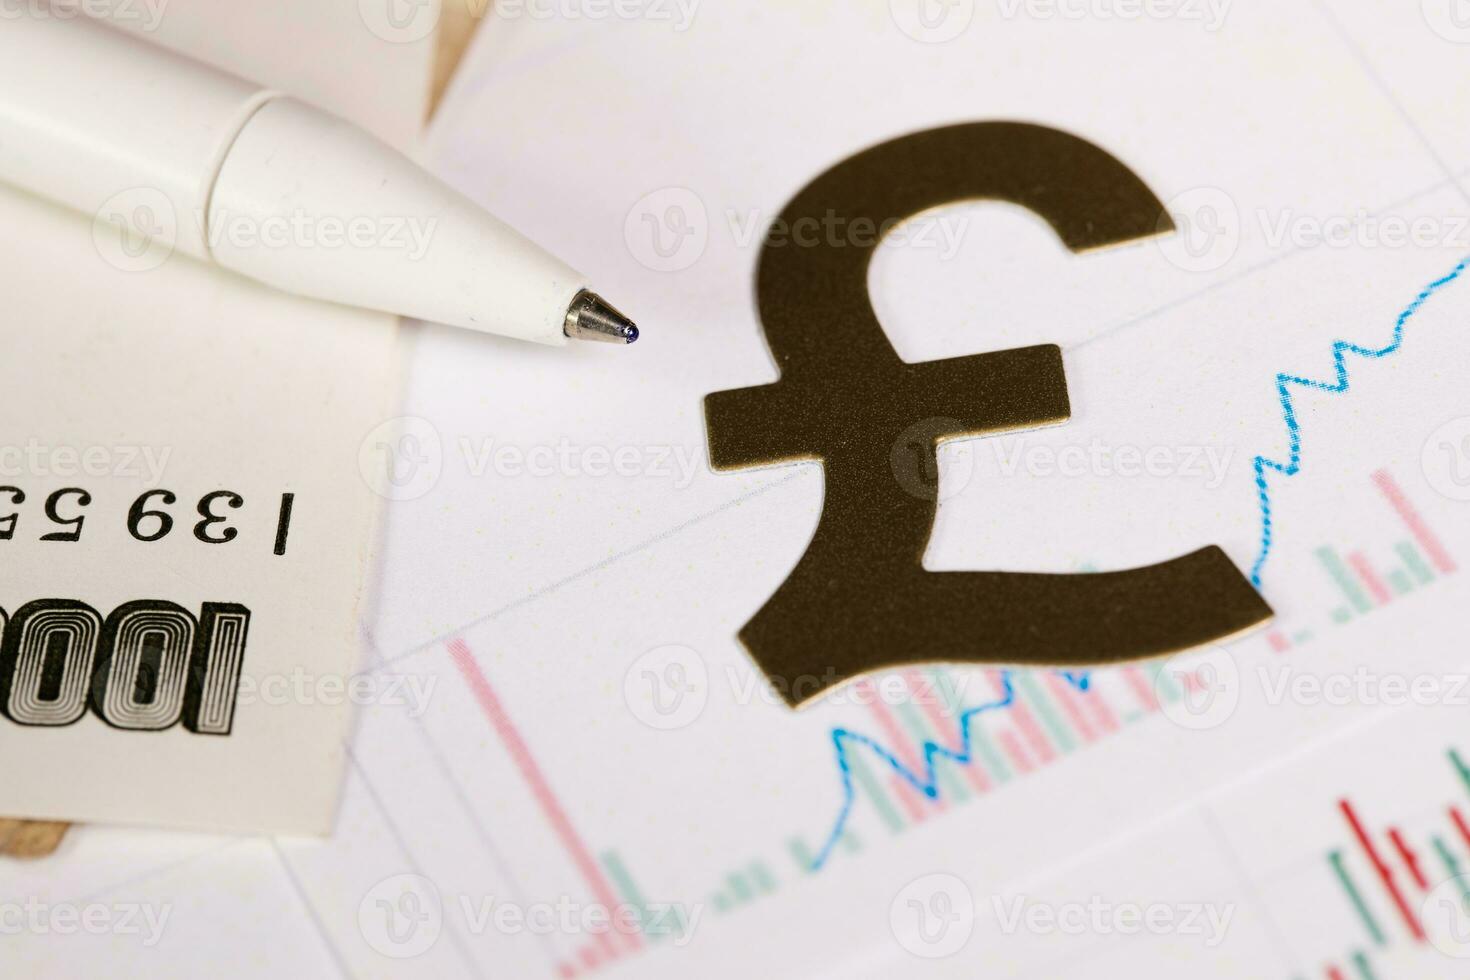 Pen on a banknote. Cutout of British pound sign in the background. photo